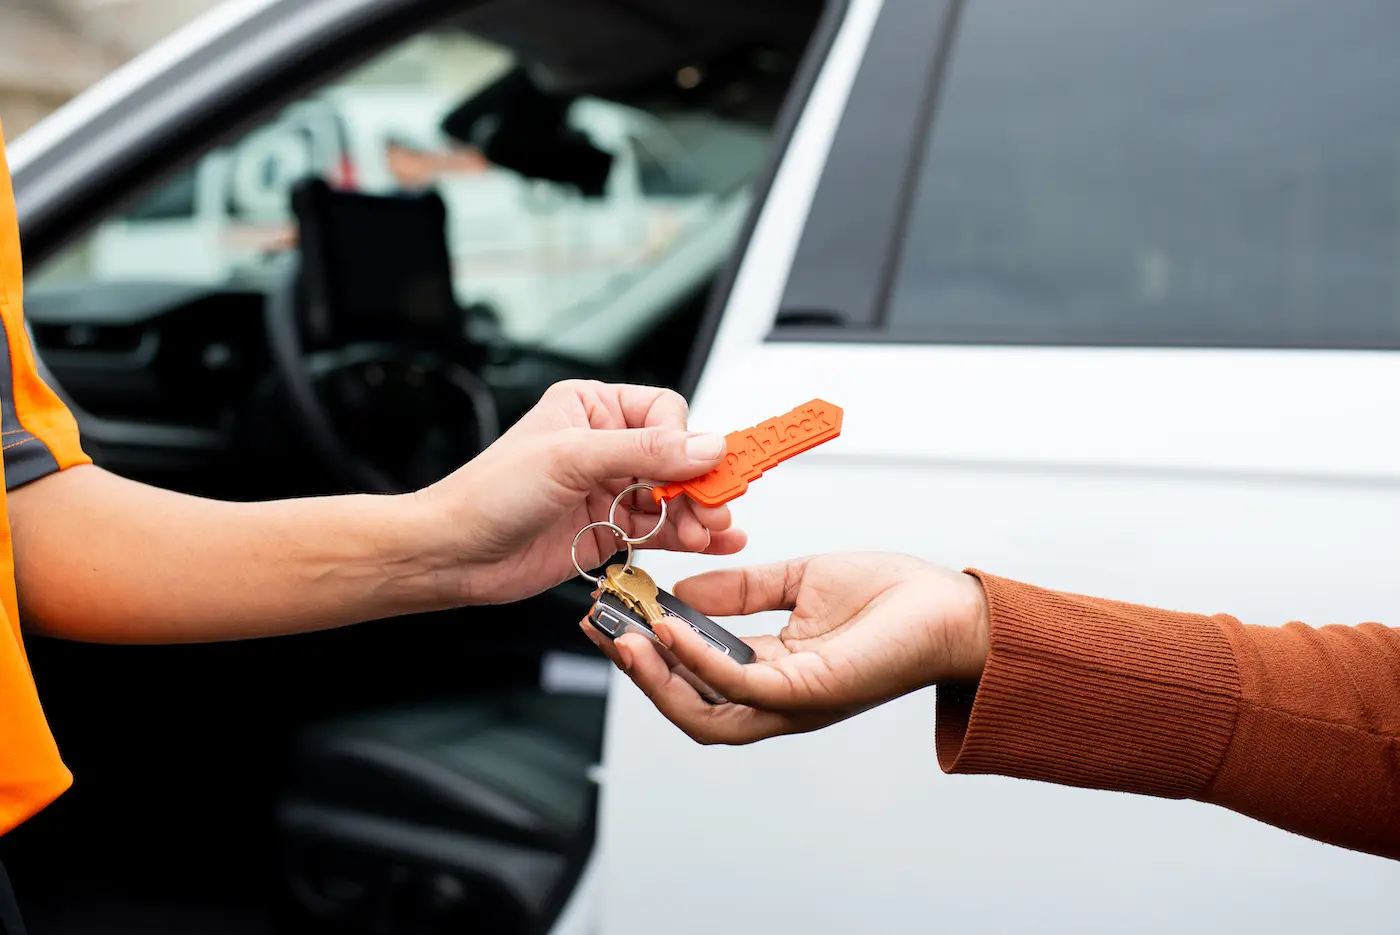 Commercial locksmith in Metairie handing a set of master keys to a commercial auto fleet owner.